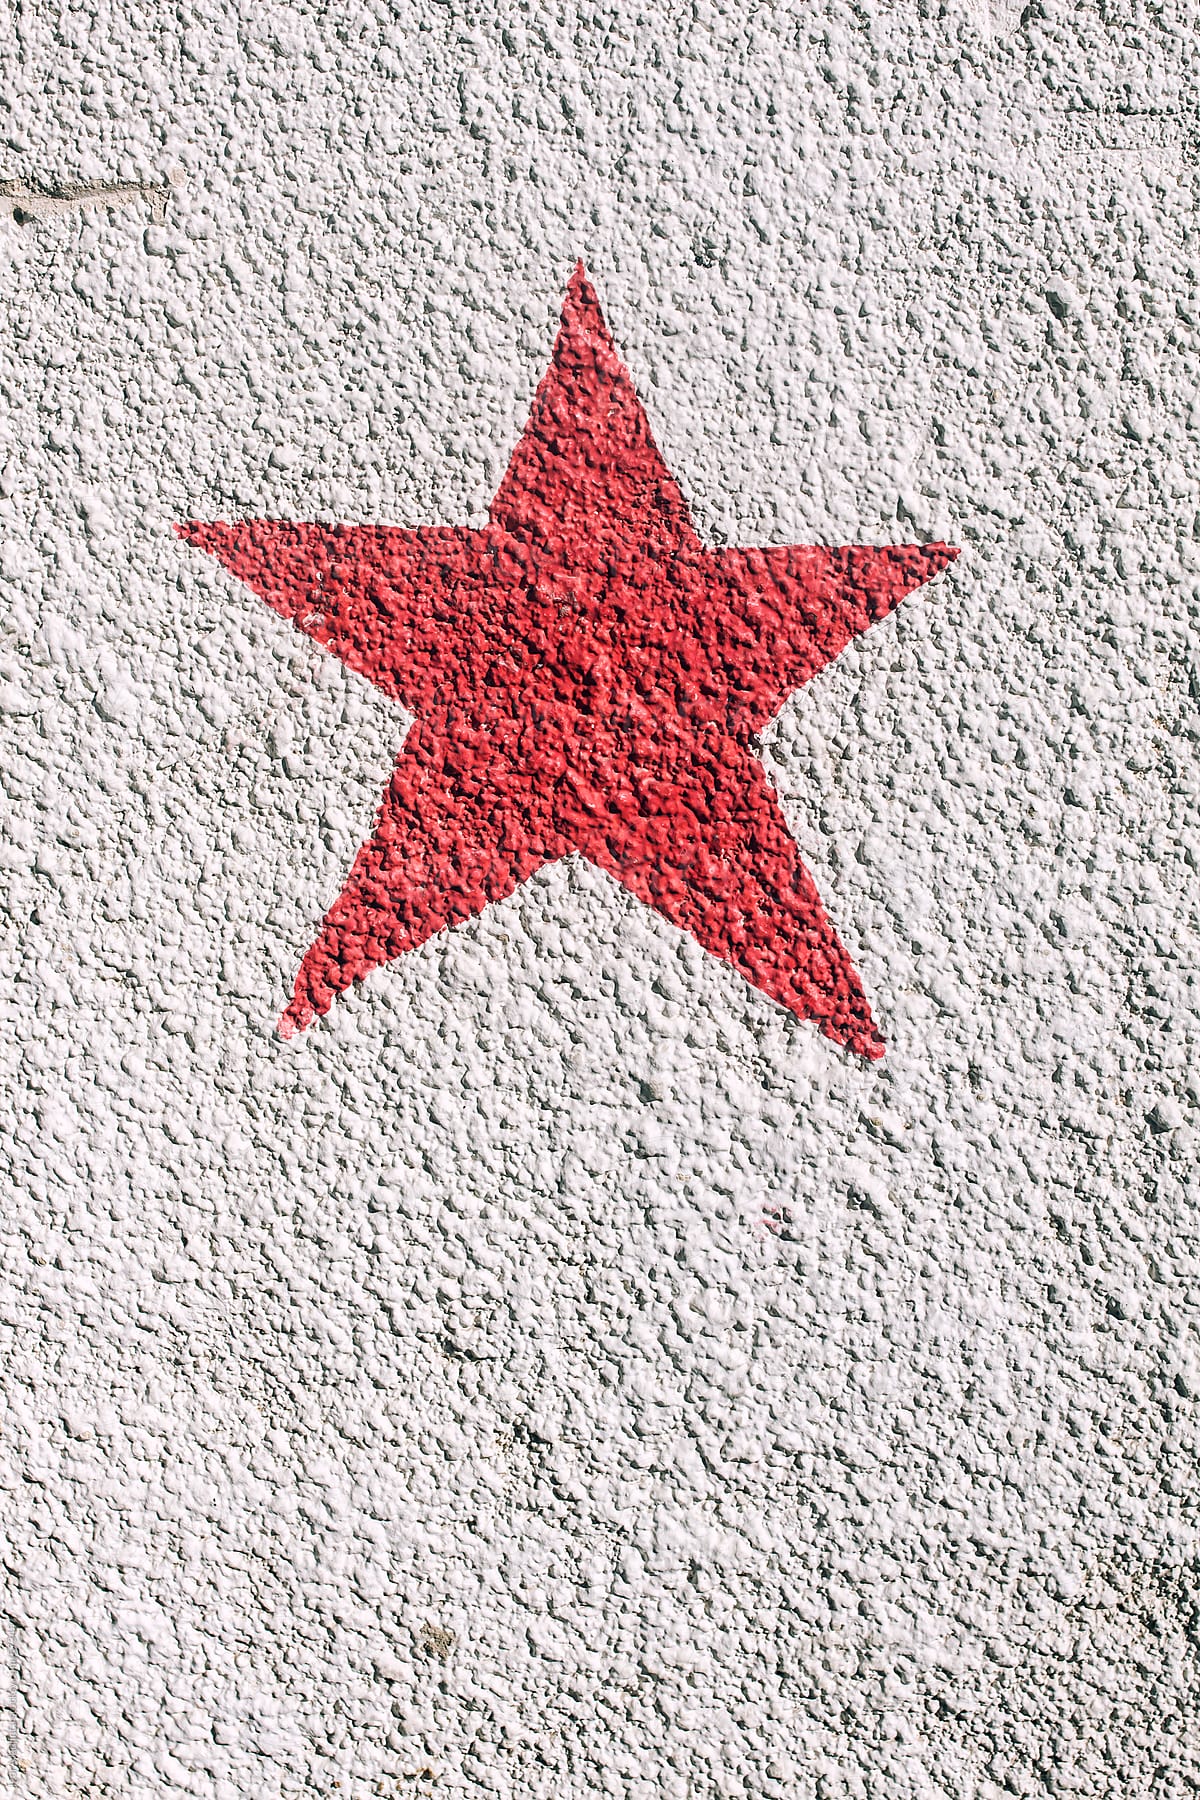 red star on a white wall, a symbol